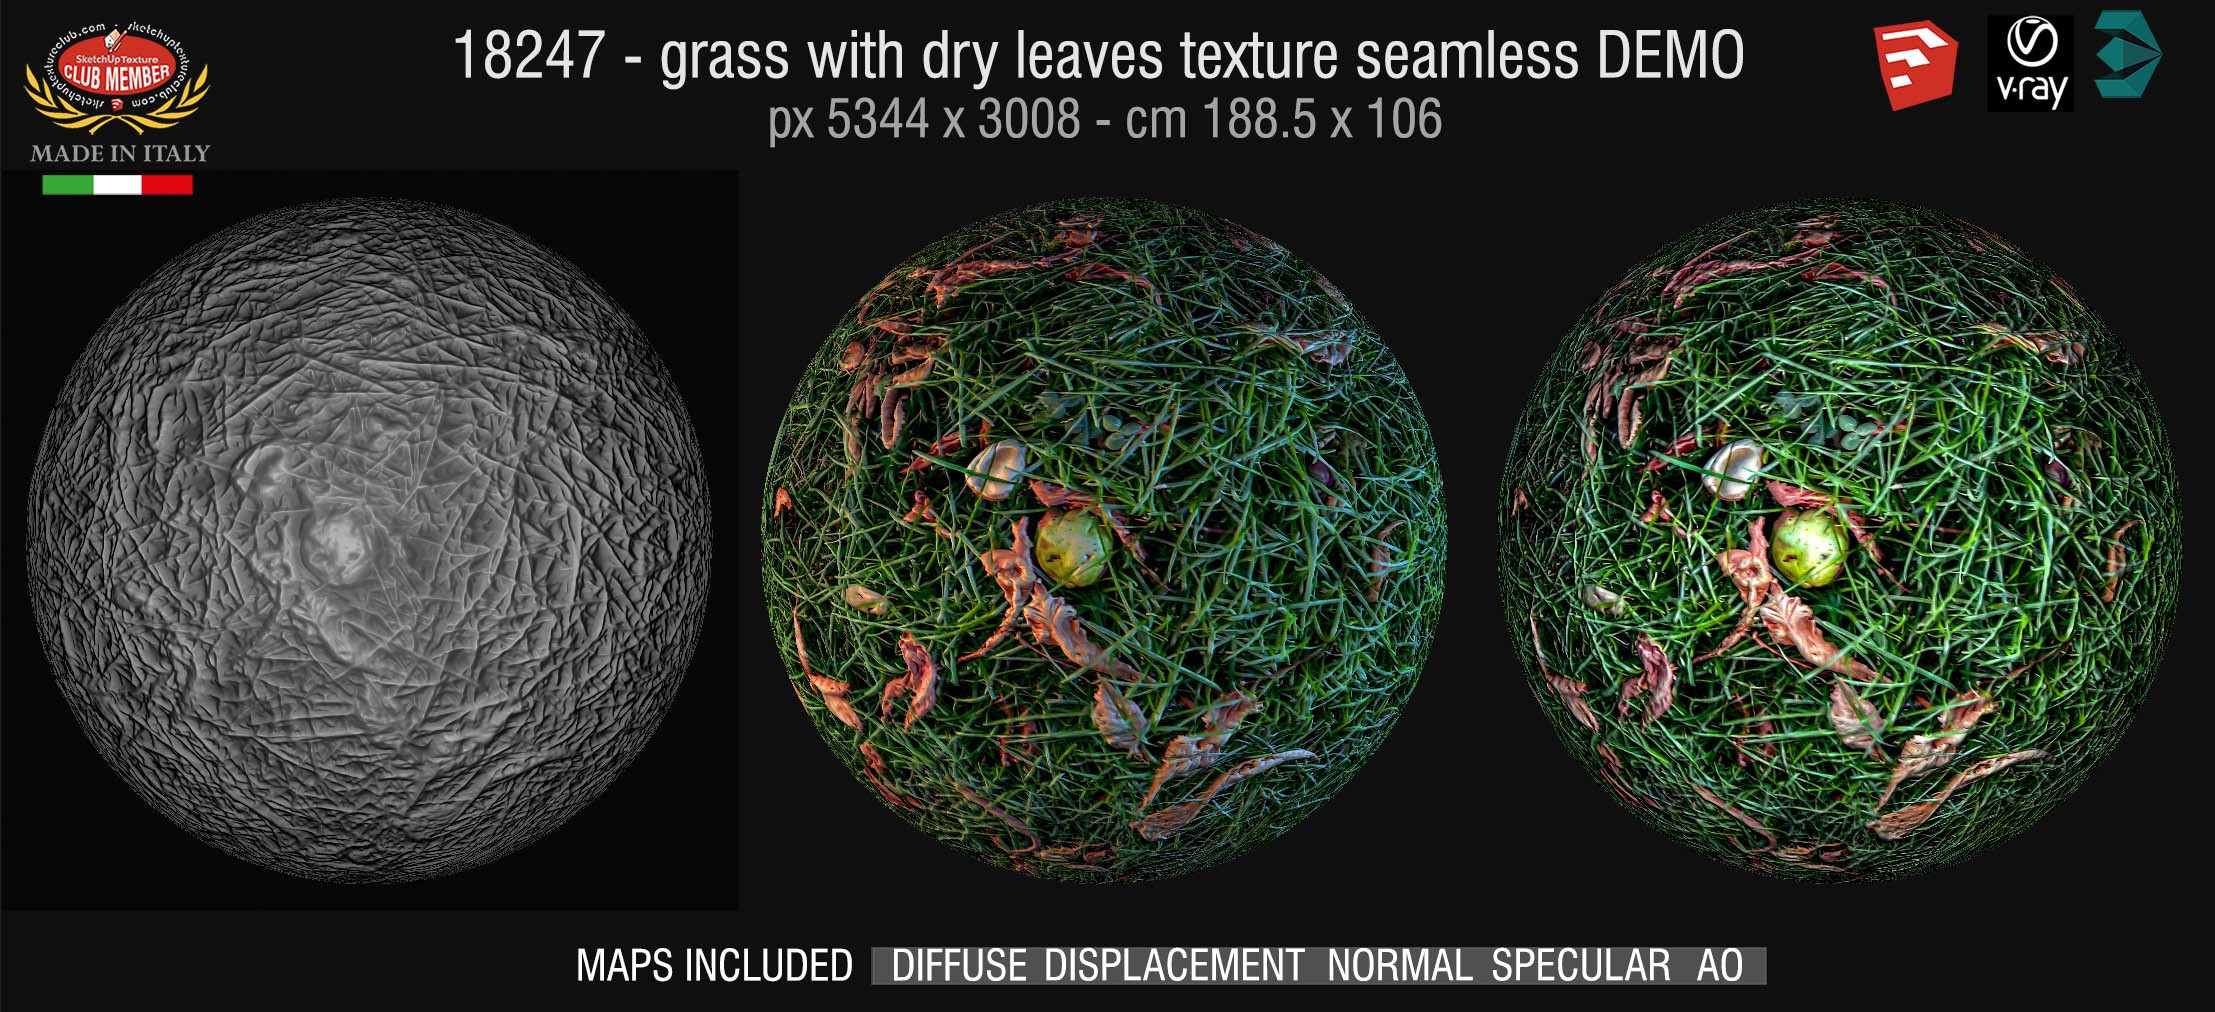 16247 HR Grass with dry leaves texture + maps DEMO